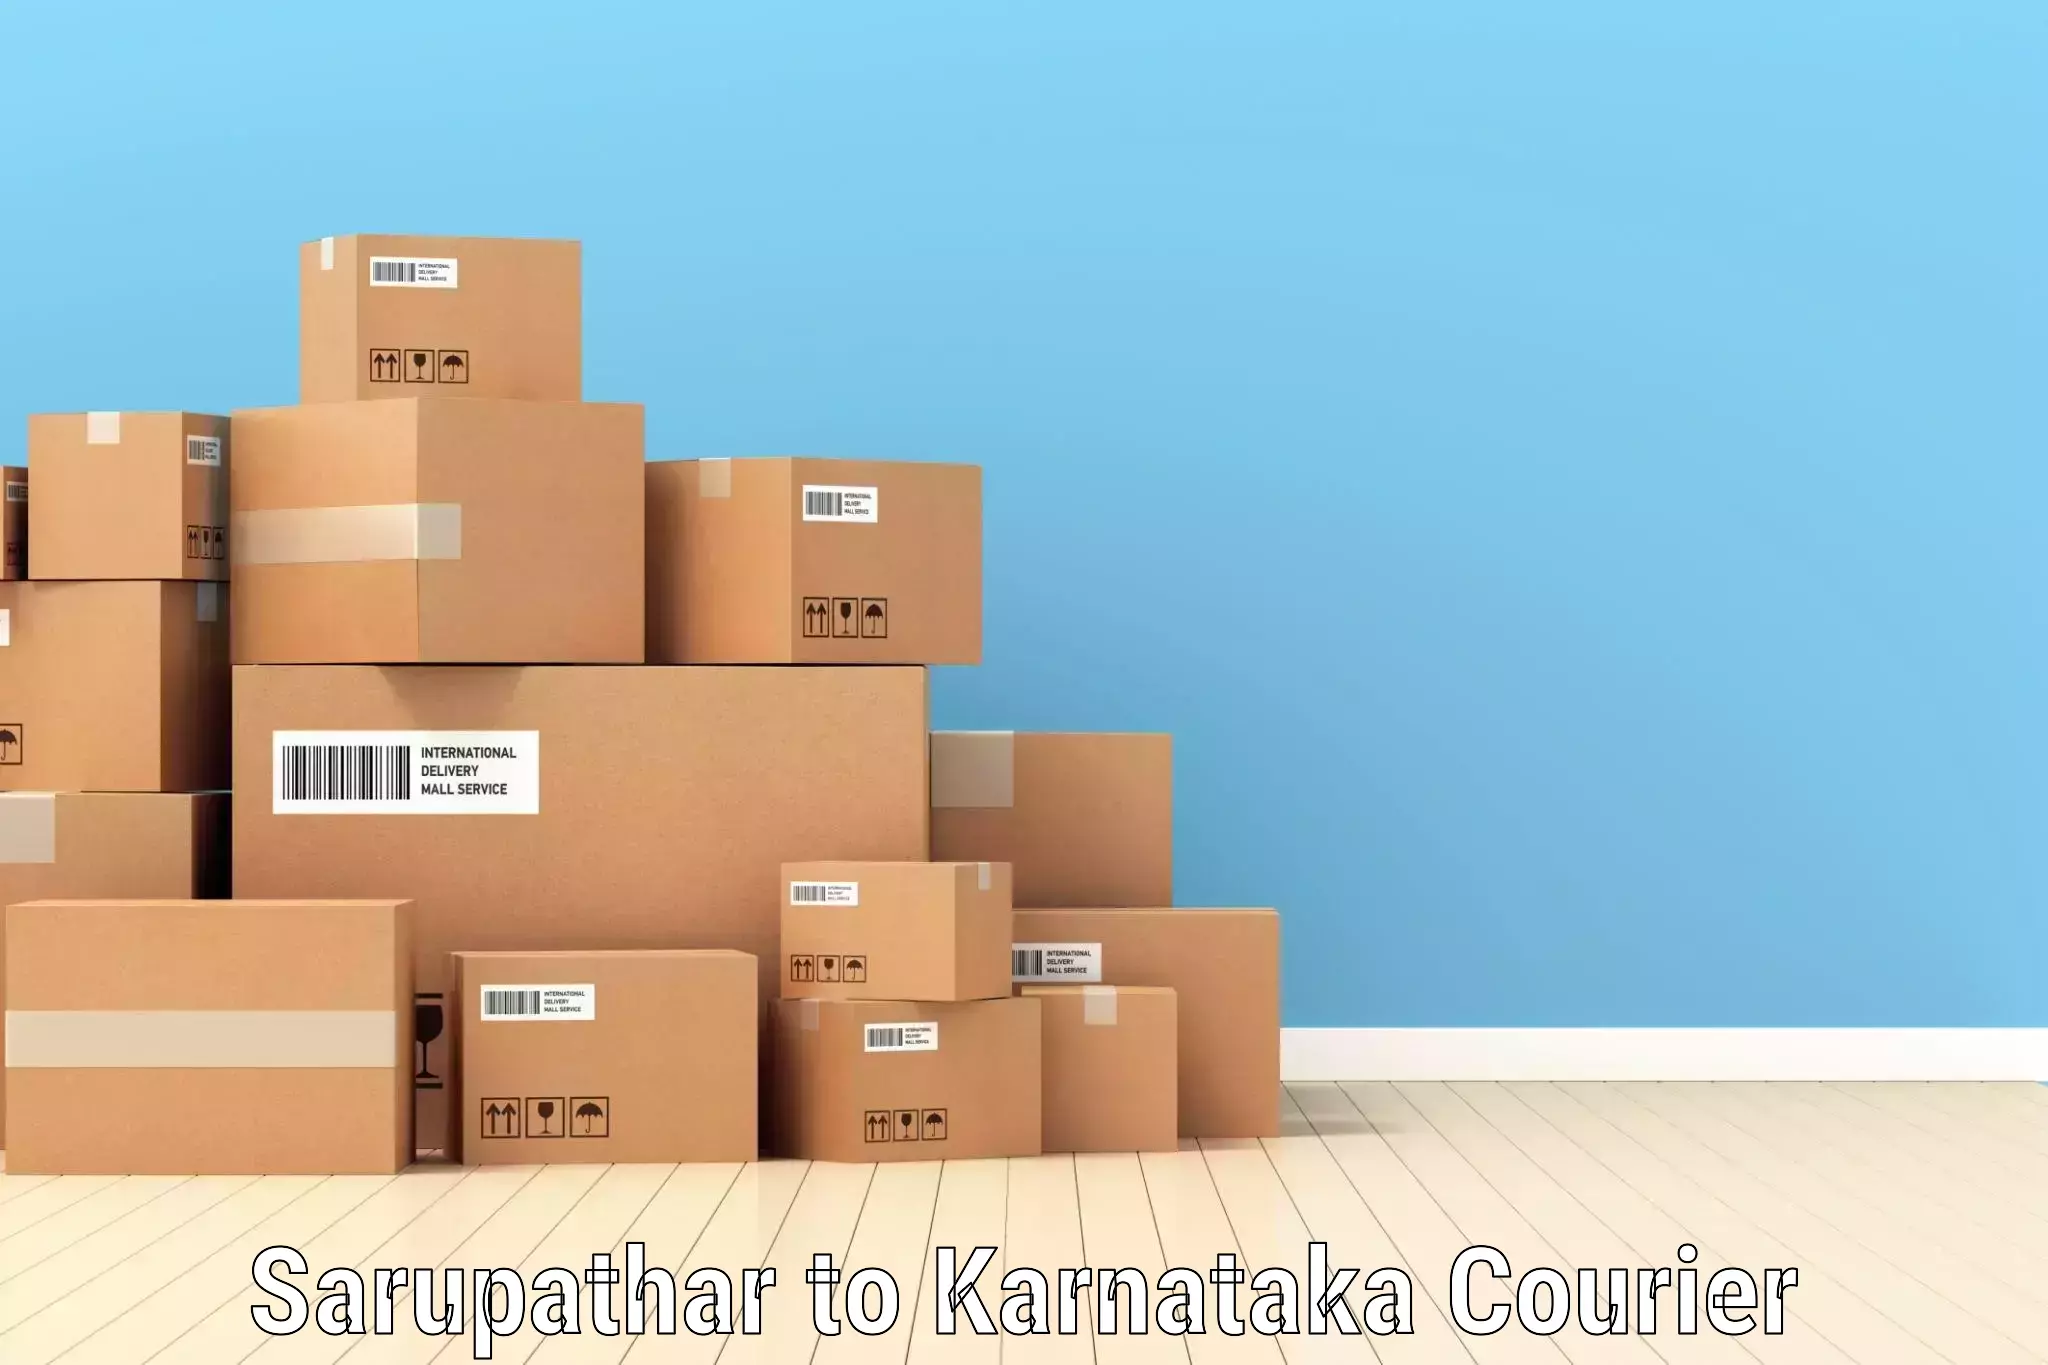 Professional parcel services in Sarupathar to Shorapur